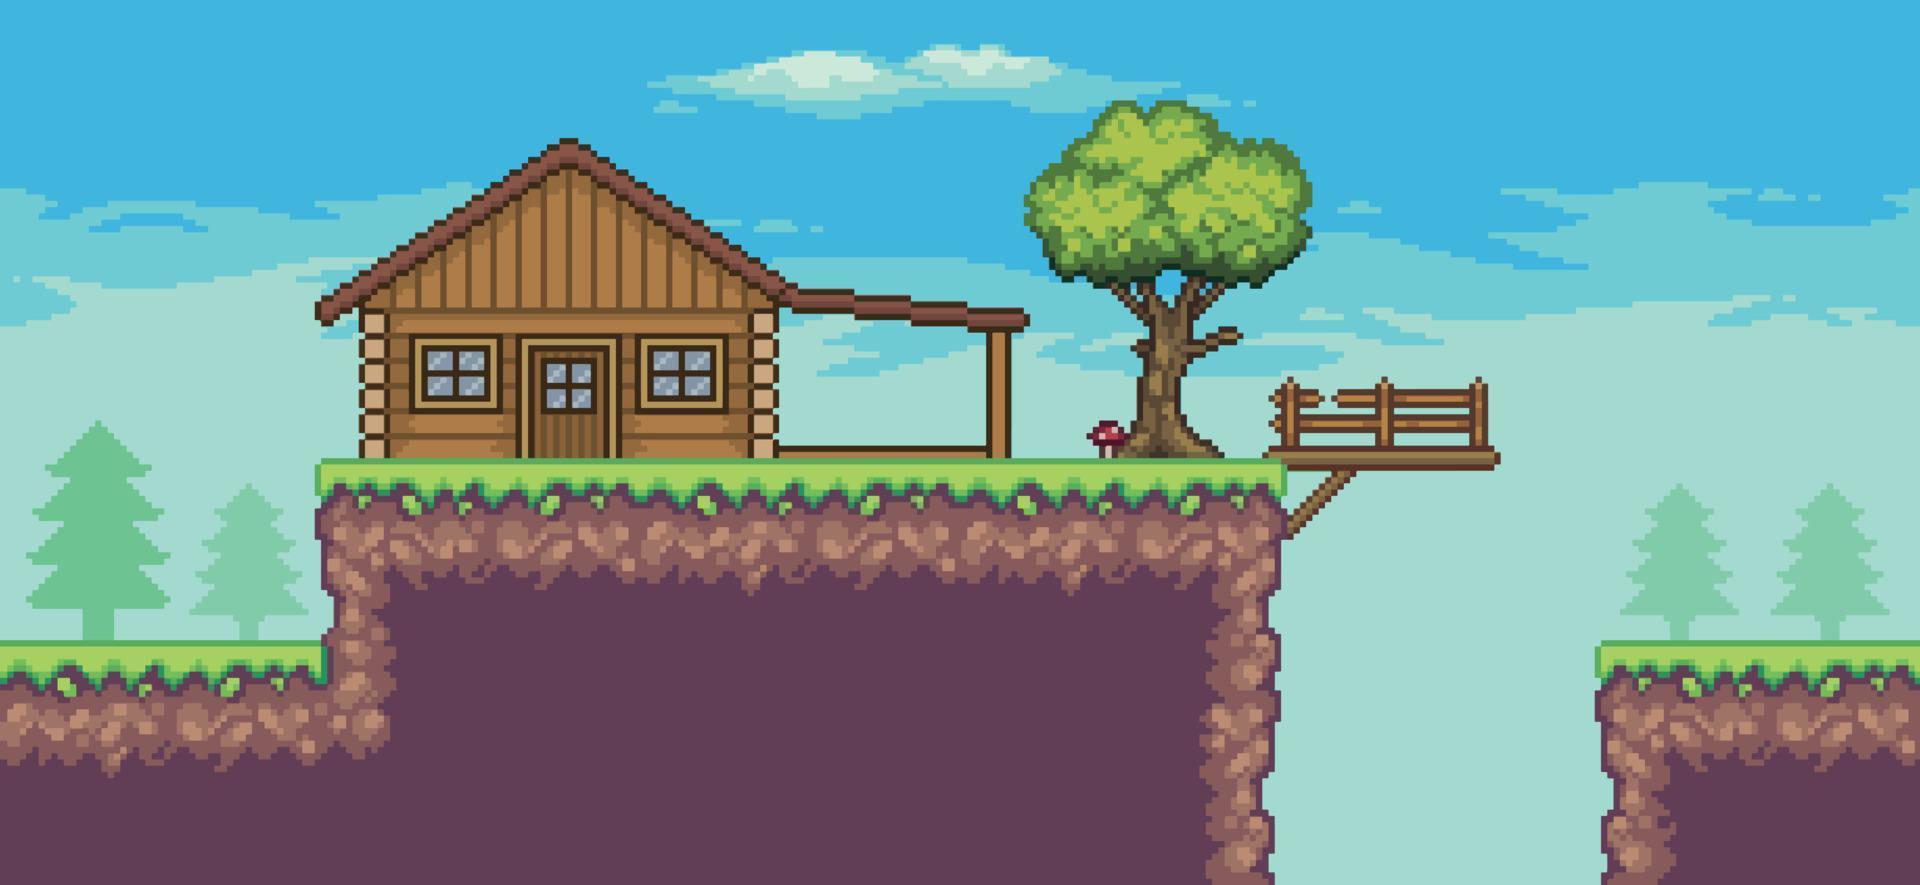 Pixel art arcade game scene with wood house, trees, fence, bridge and clouds 8bit background vector